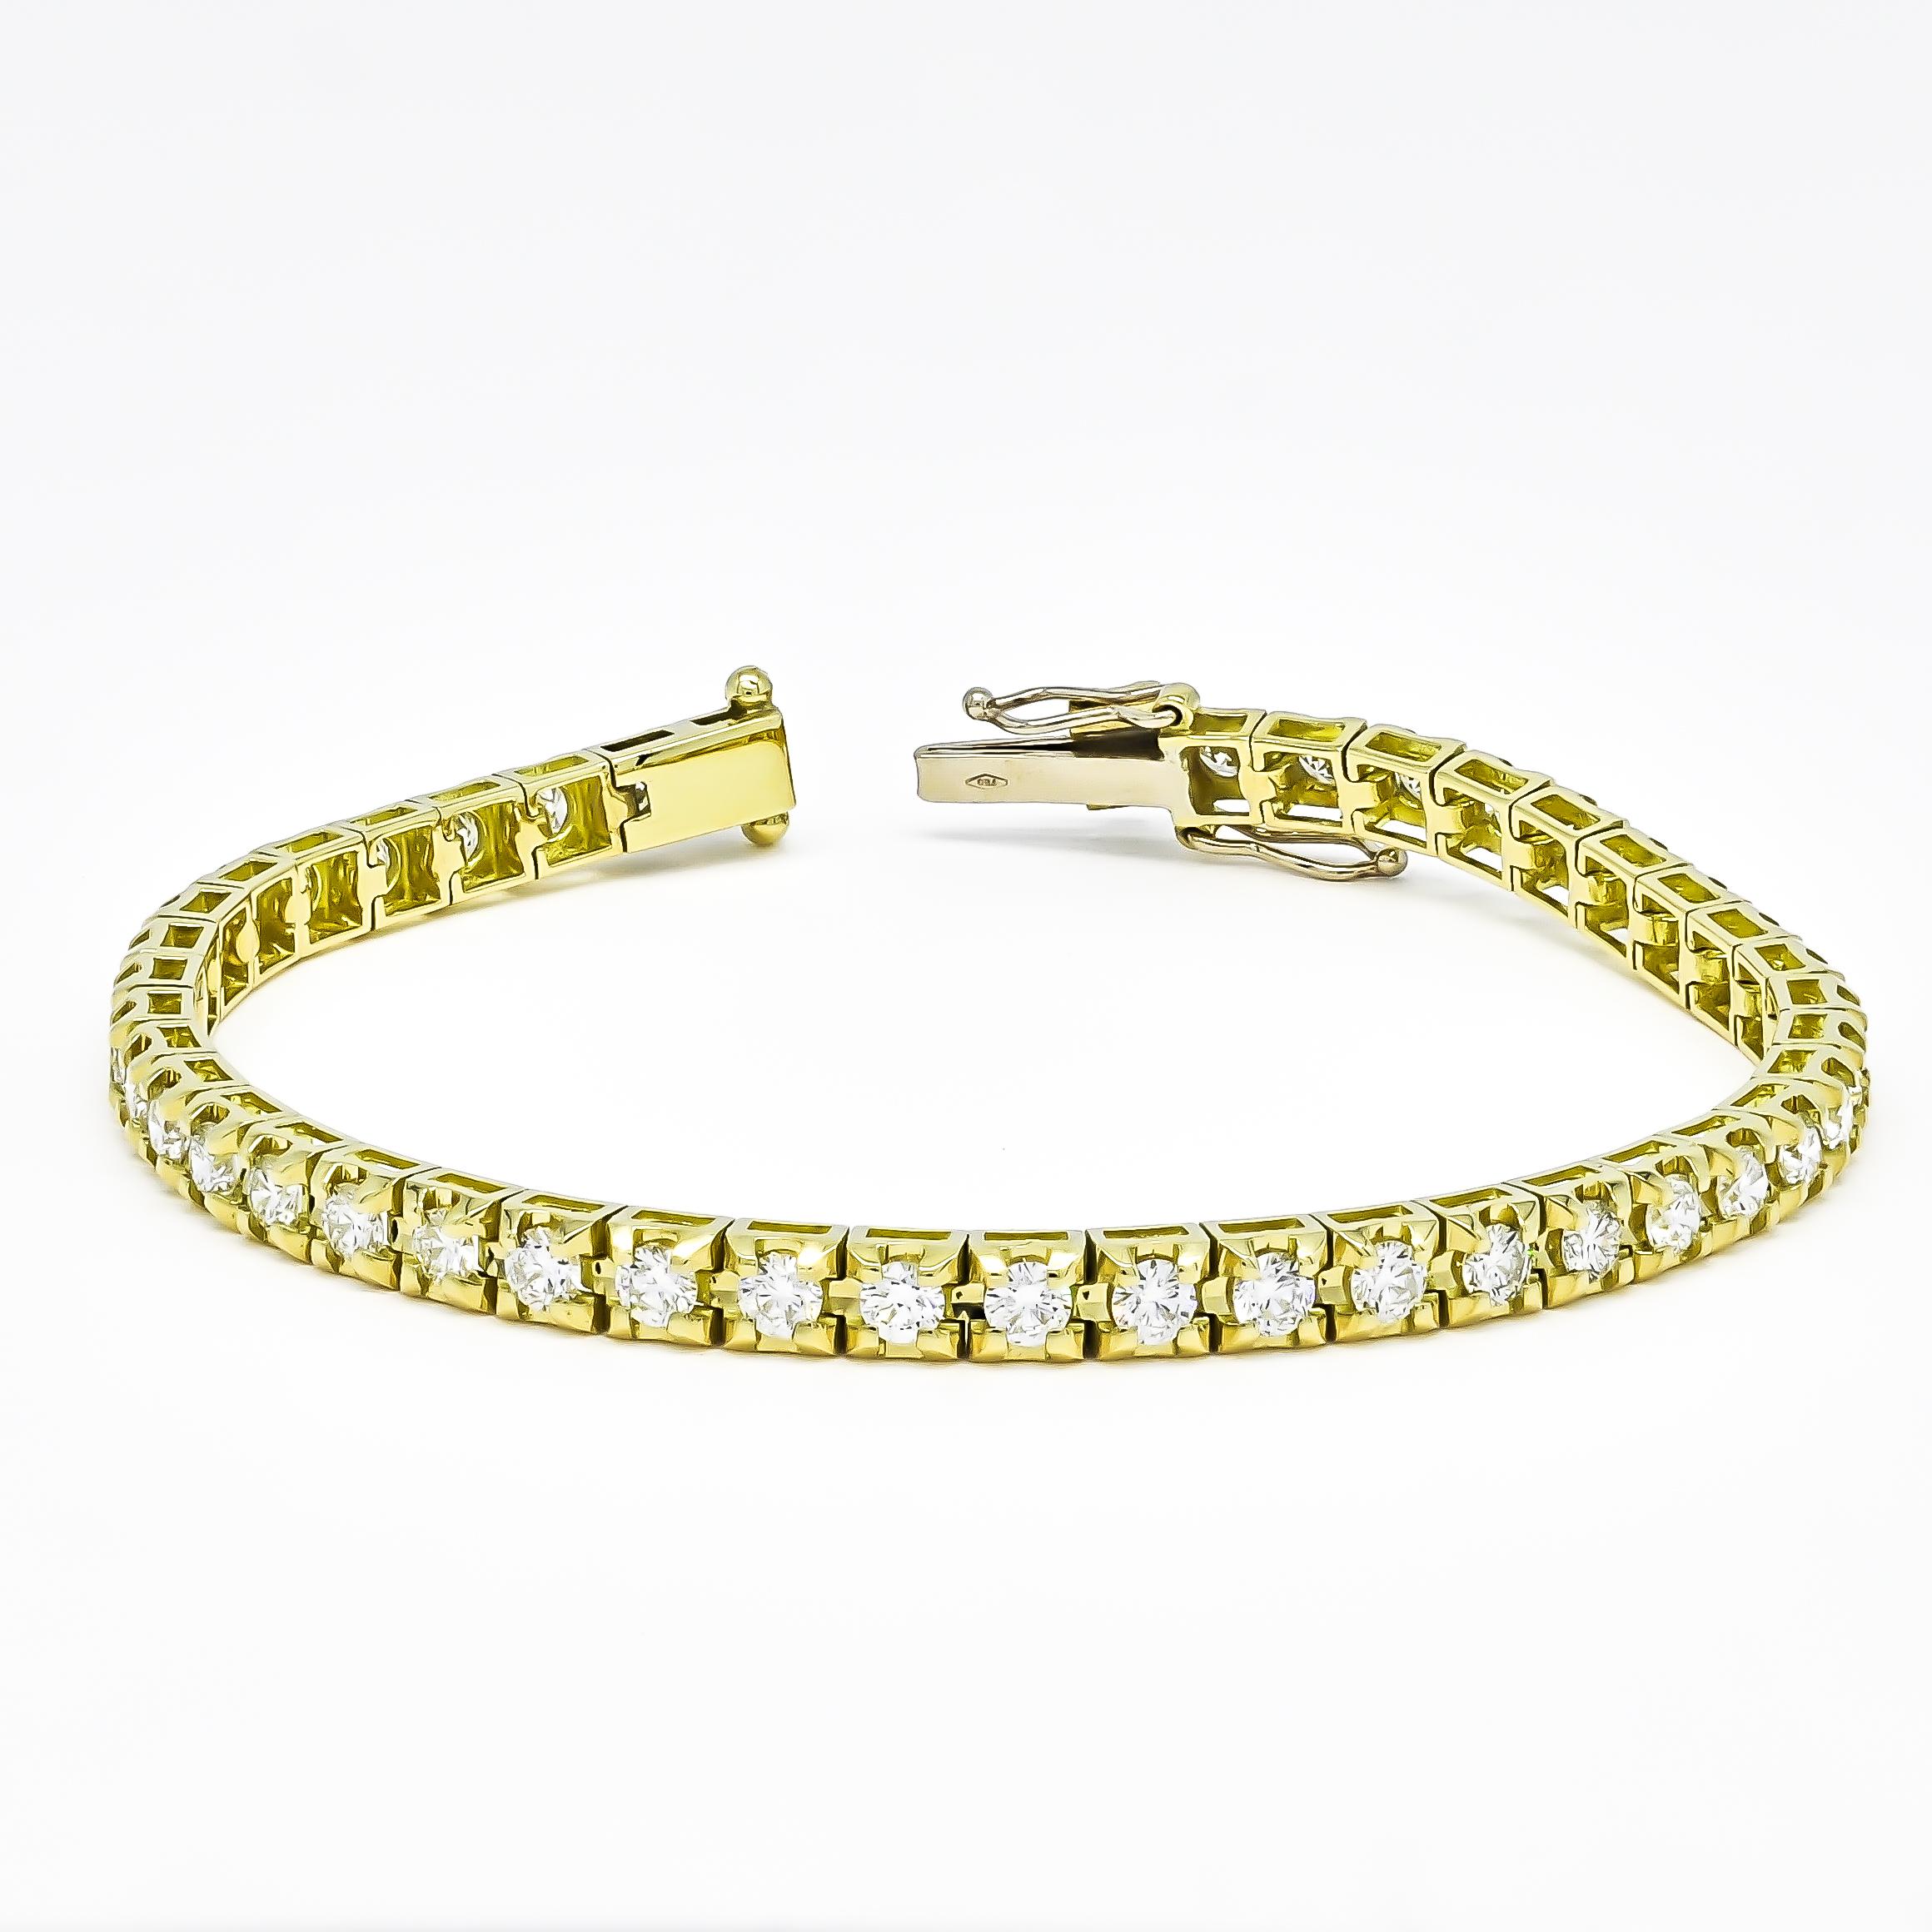 Brilliant Cut Visible 18k Yellow Gold Four Prong Tennis Bracelet in 8.00ct Natural Diamonds For Sale